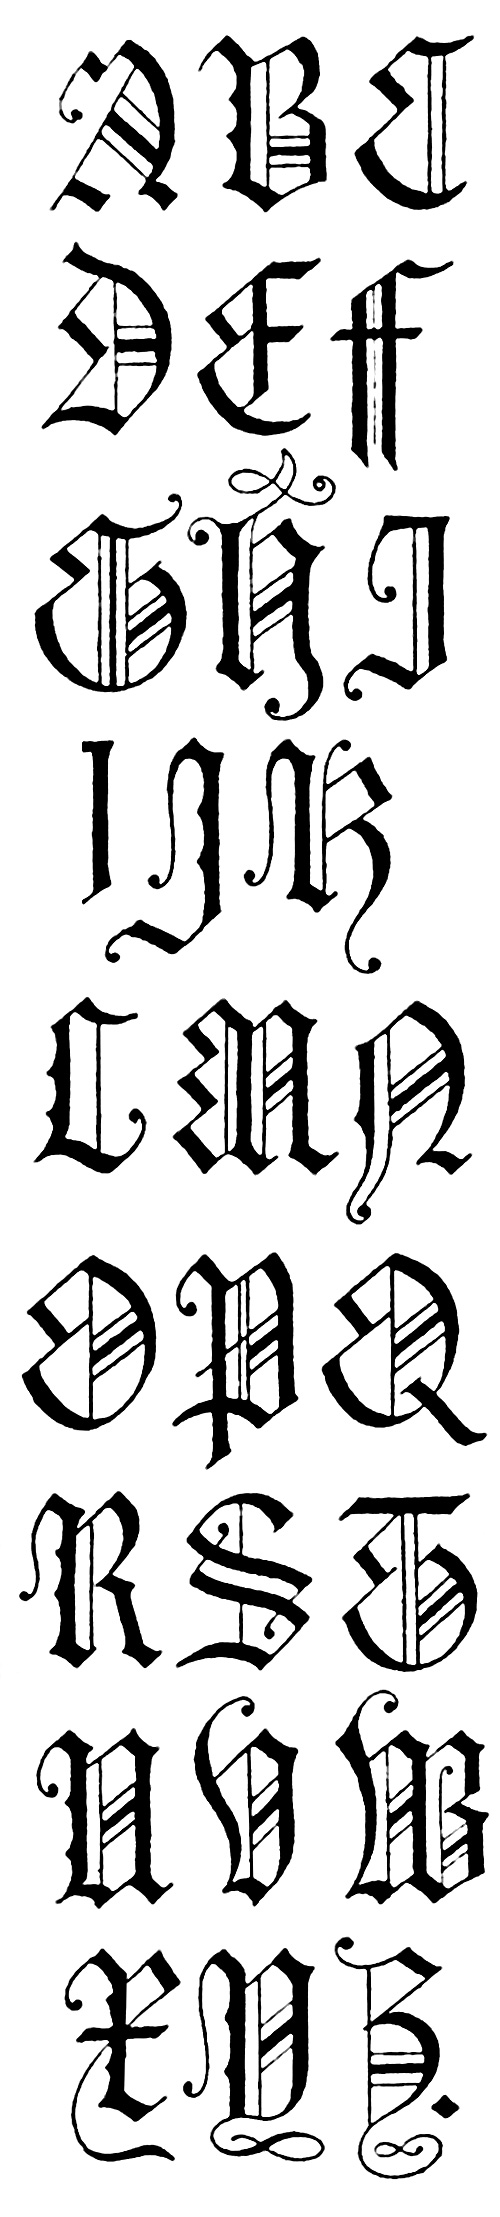 Gothic Lettering :: English Gothic Letters - 15th Century